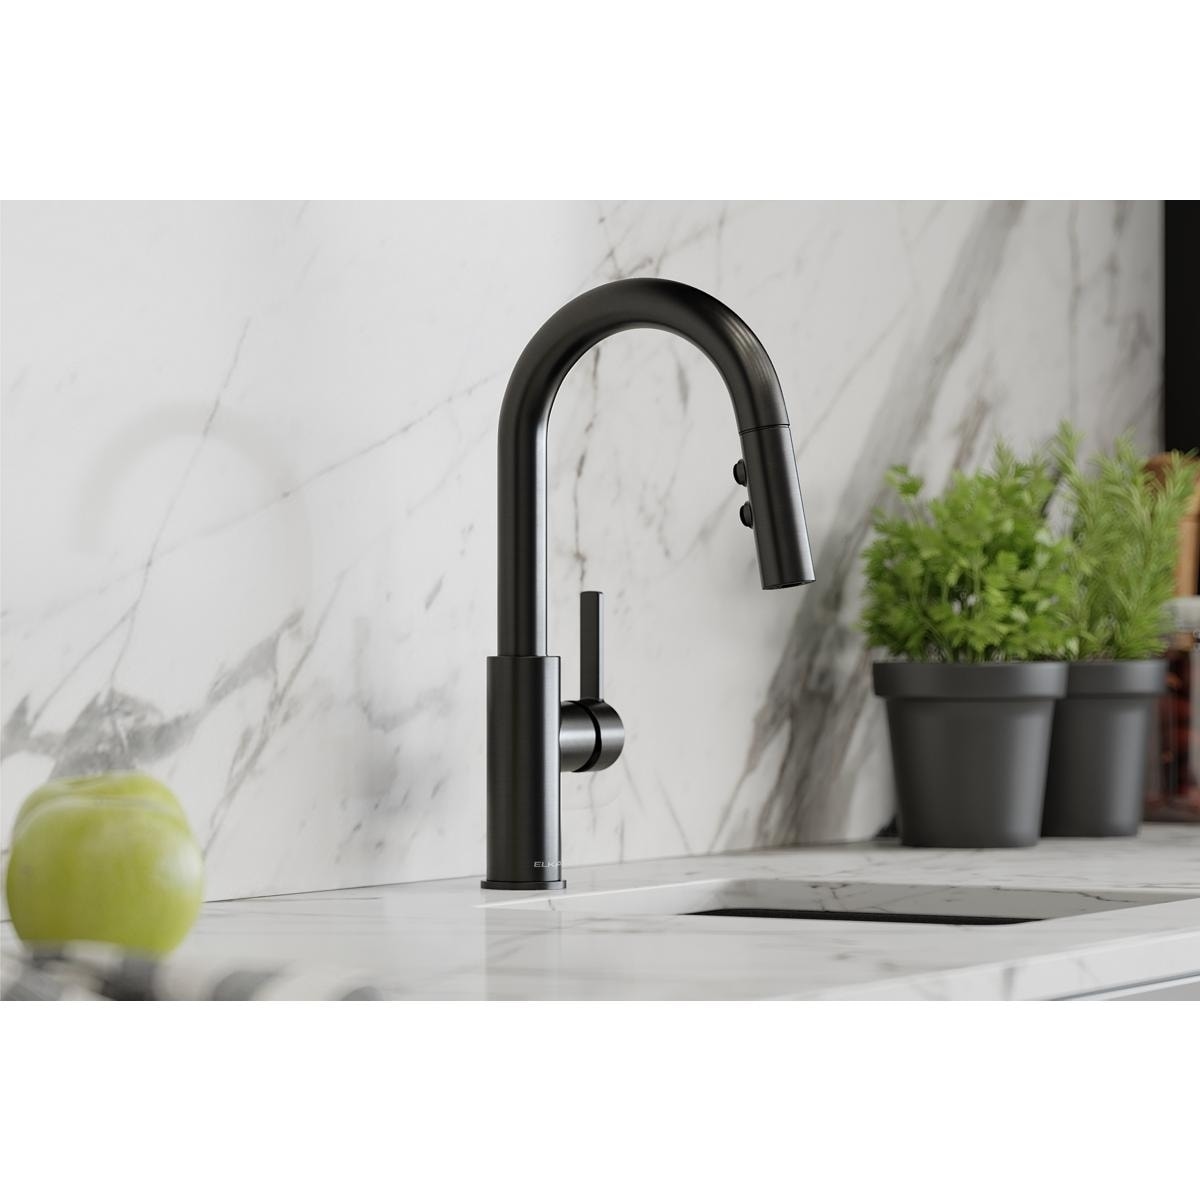 Elkay Avado Single Hole Bar Faucet with Pull-down Spray and Lever Handle  On Sale Bed Bath  Beyond 31204747